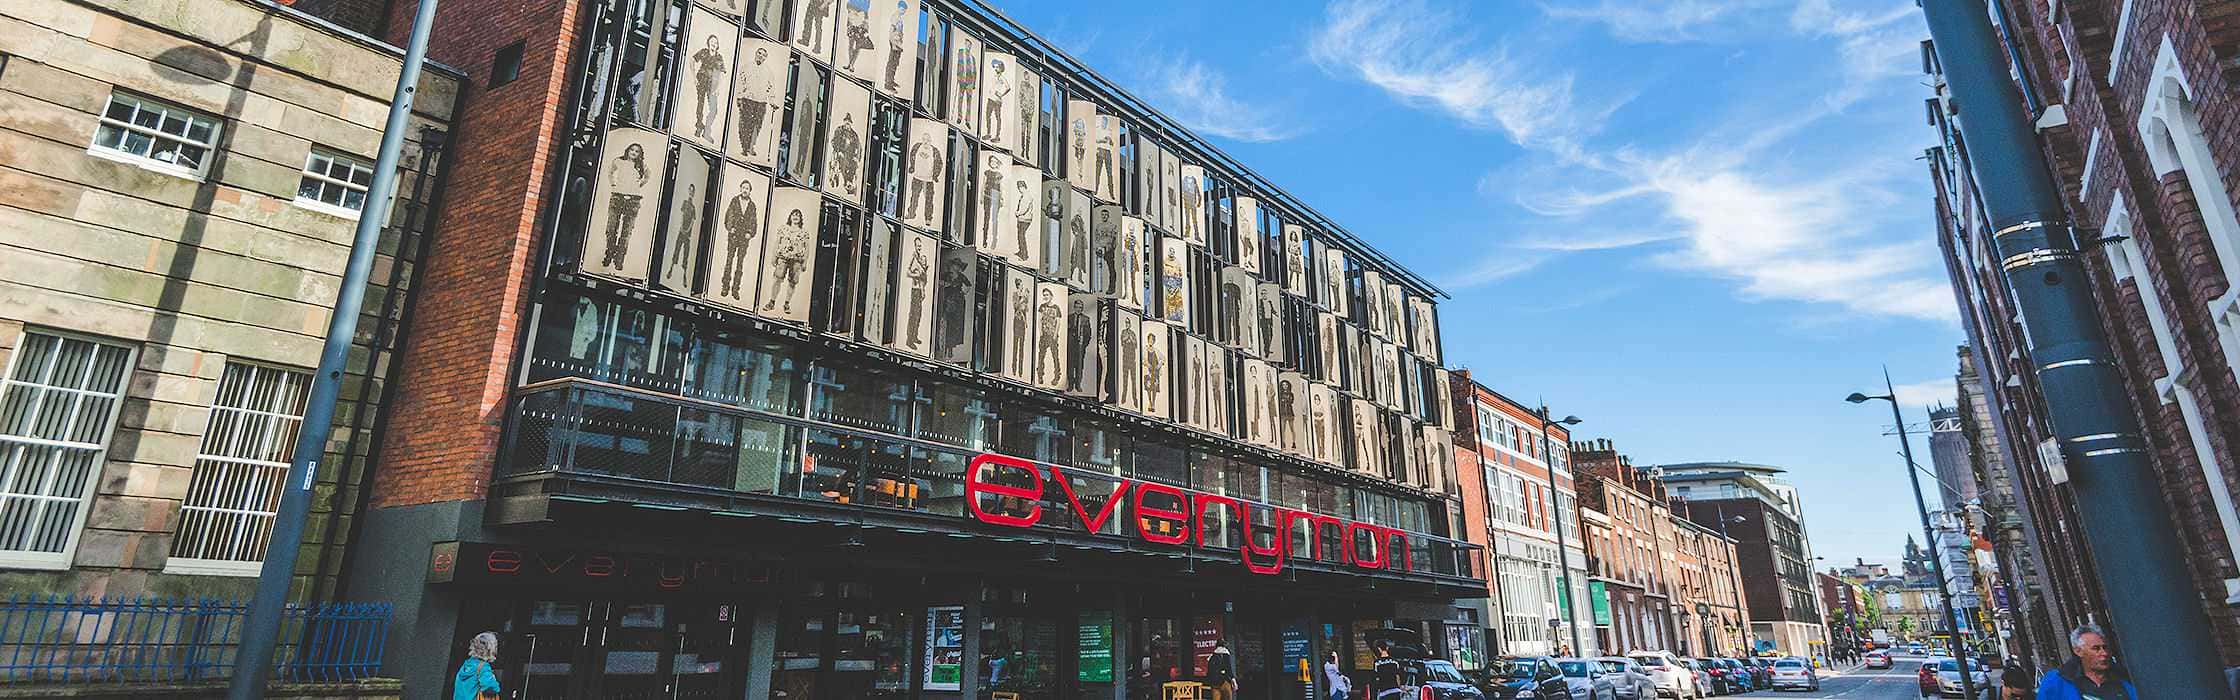 What's On at the Everyman Theatre, Liverpool